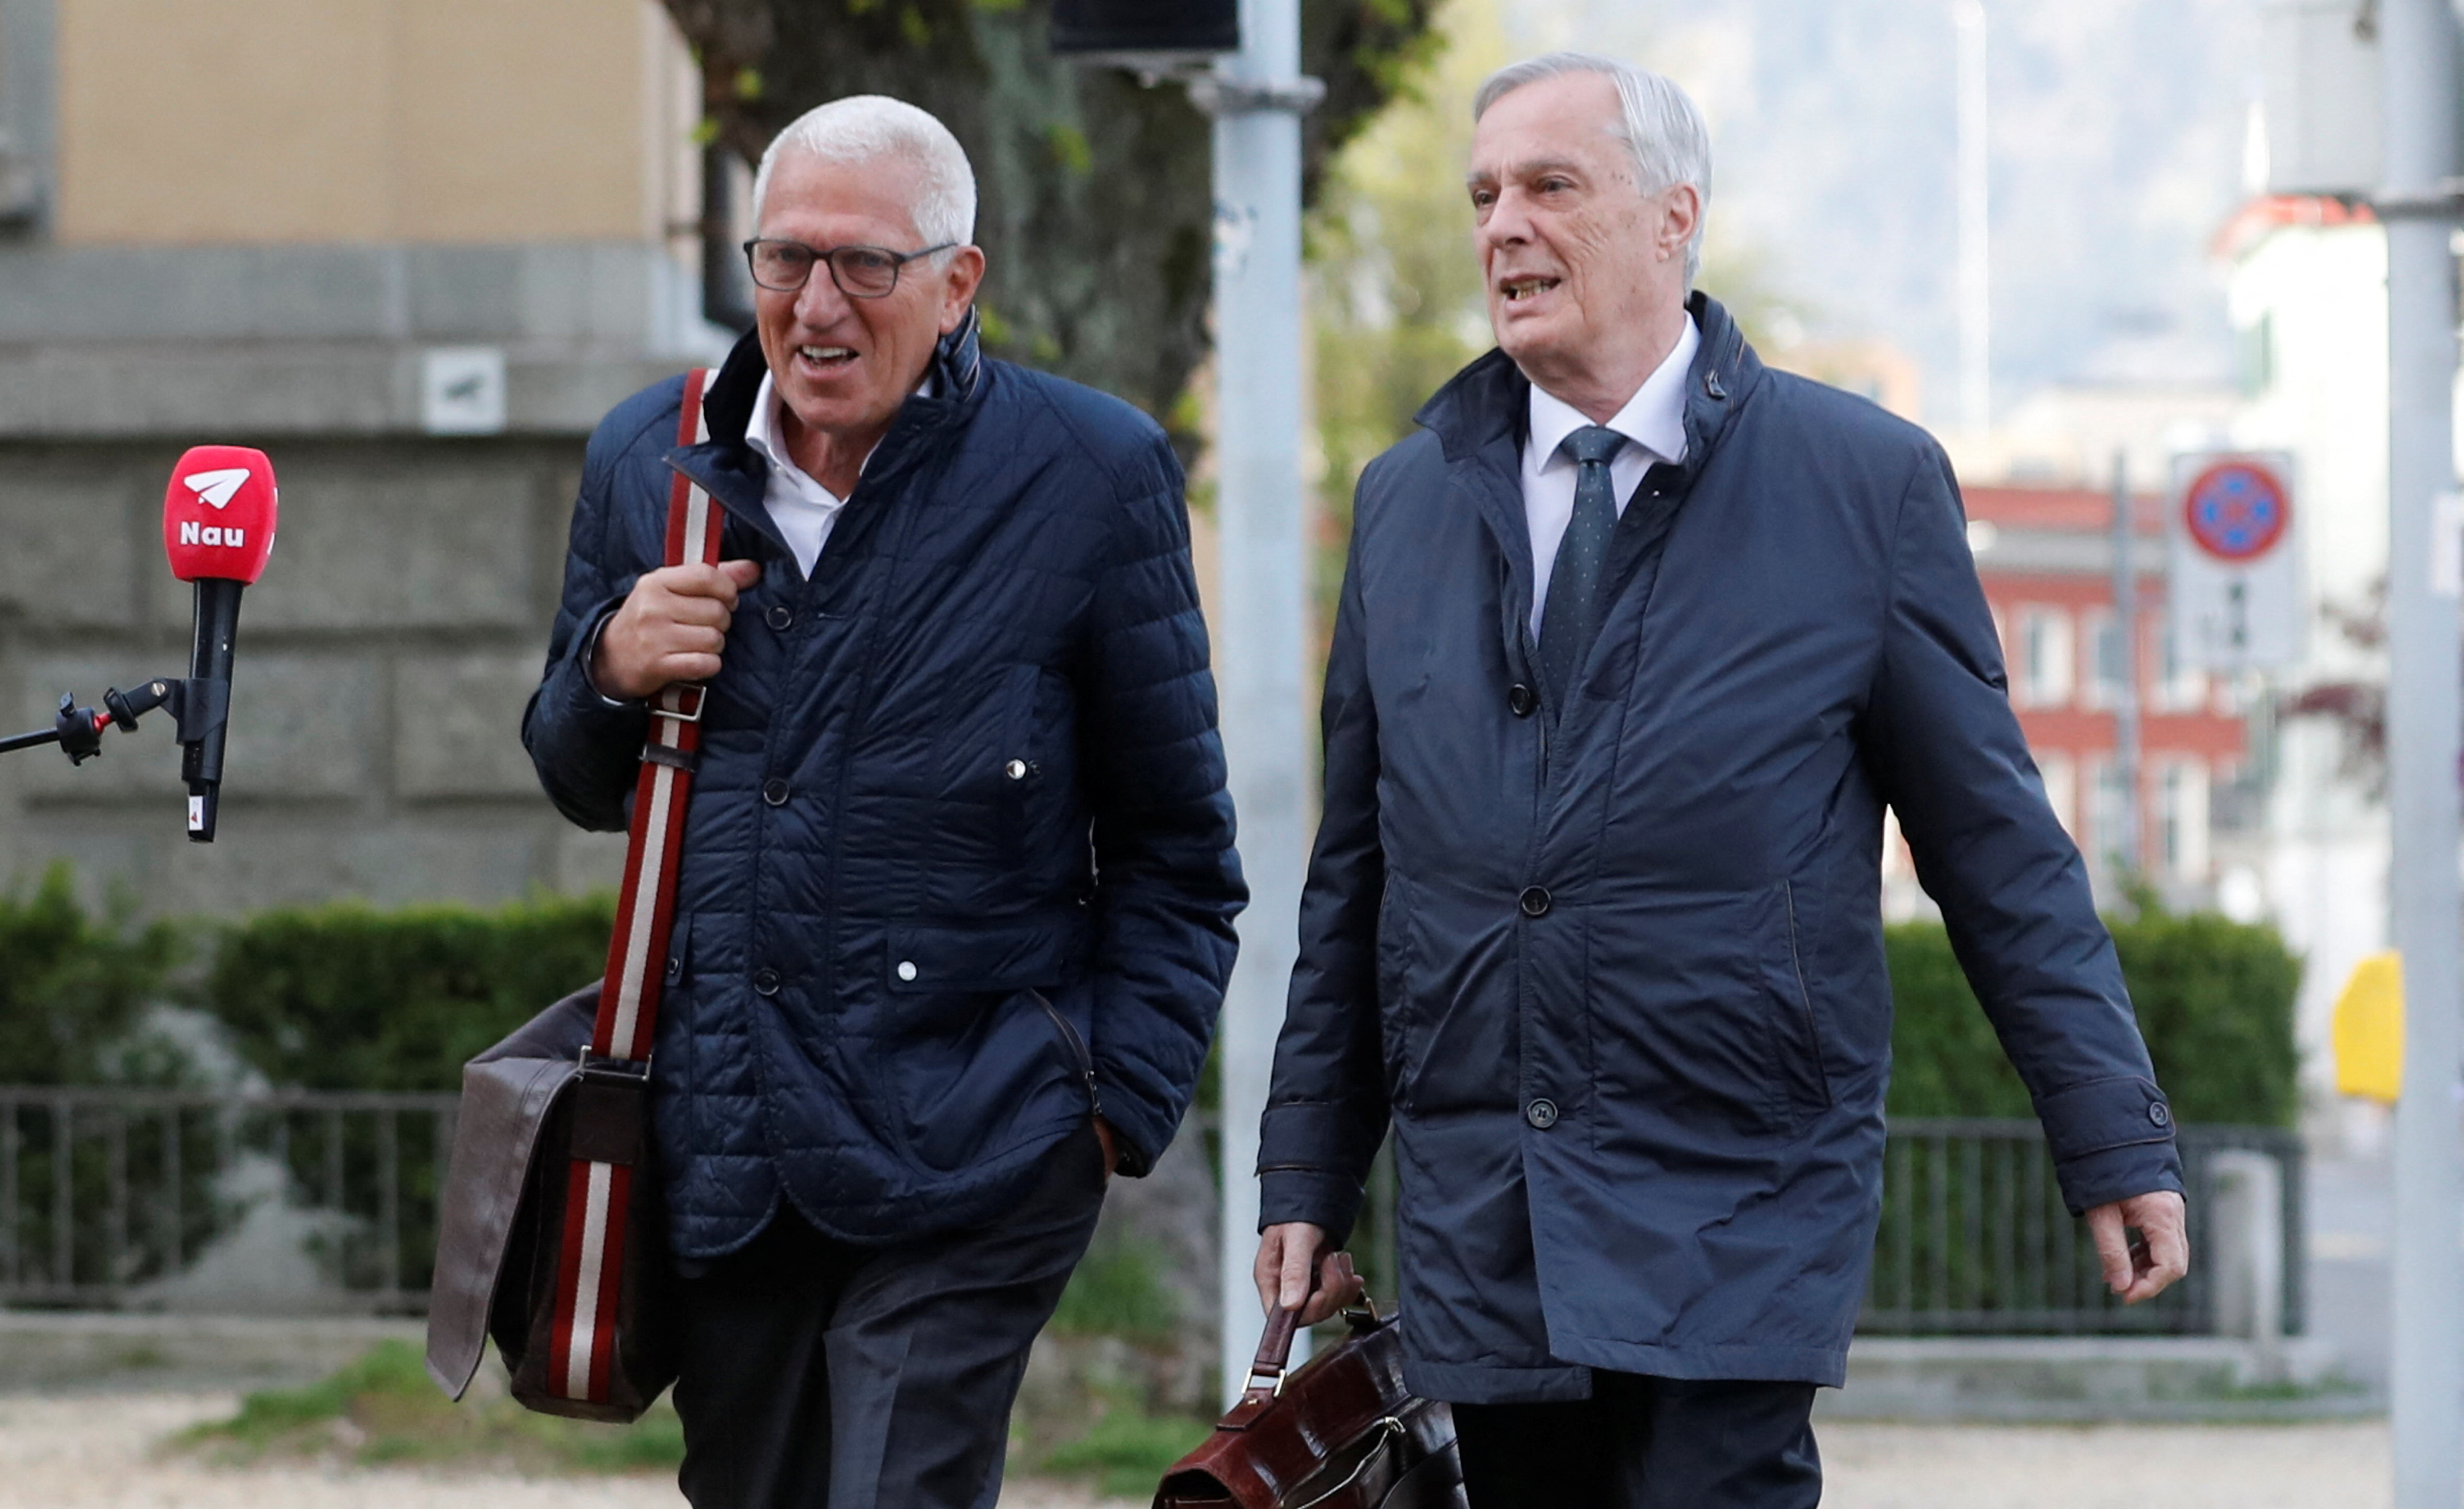 Pierin Vincenz, former CEO of Swiss Raiffeisen and his lawyer Lorenz Erni arrive before a trial in Zurich